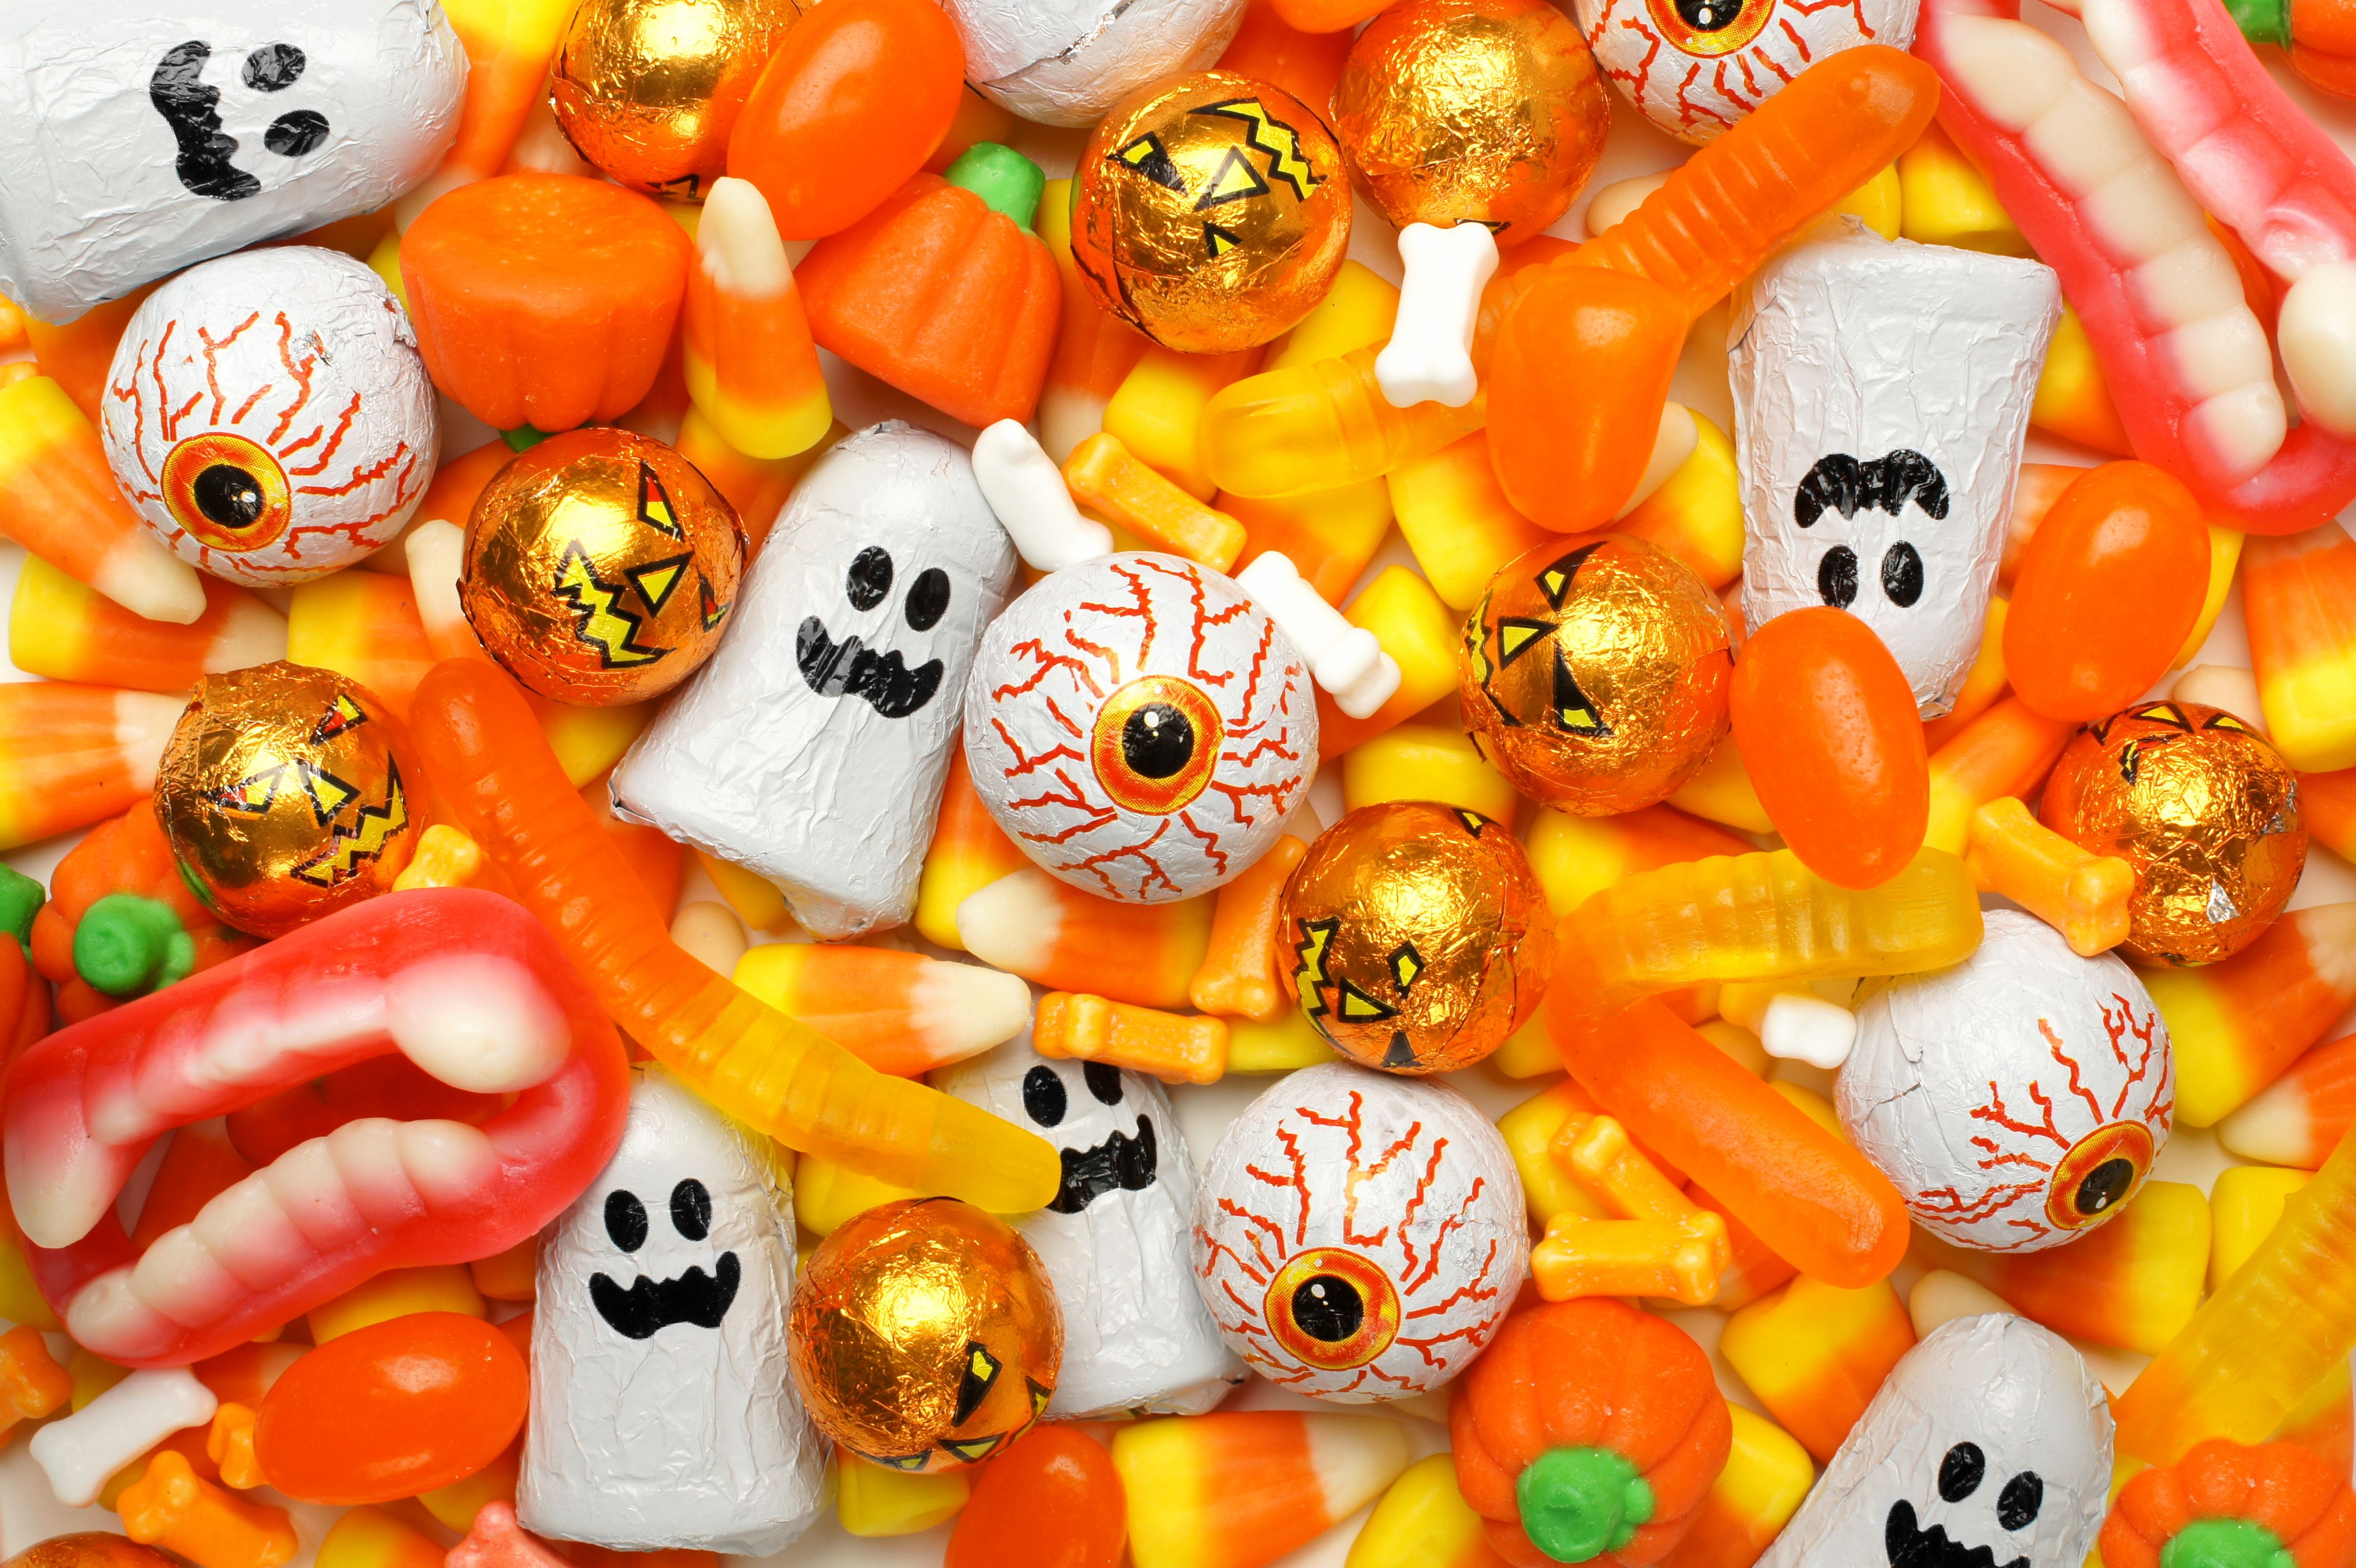 https://hips.hearstapps.com/hmg-prod/images/halloween-candy-background-royalty-free-image-1627919414.jpg